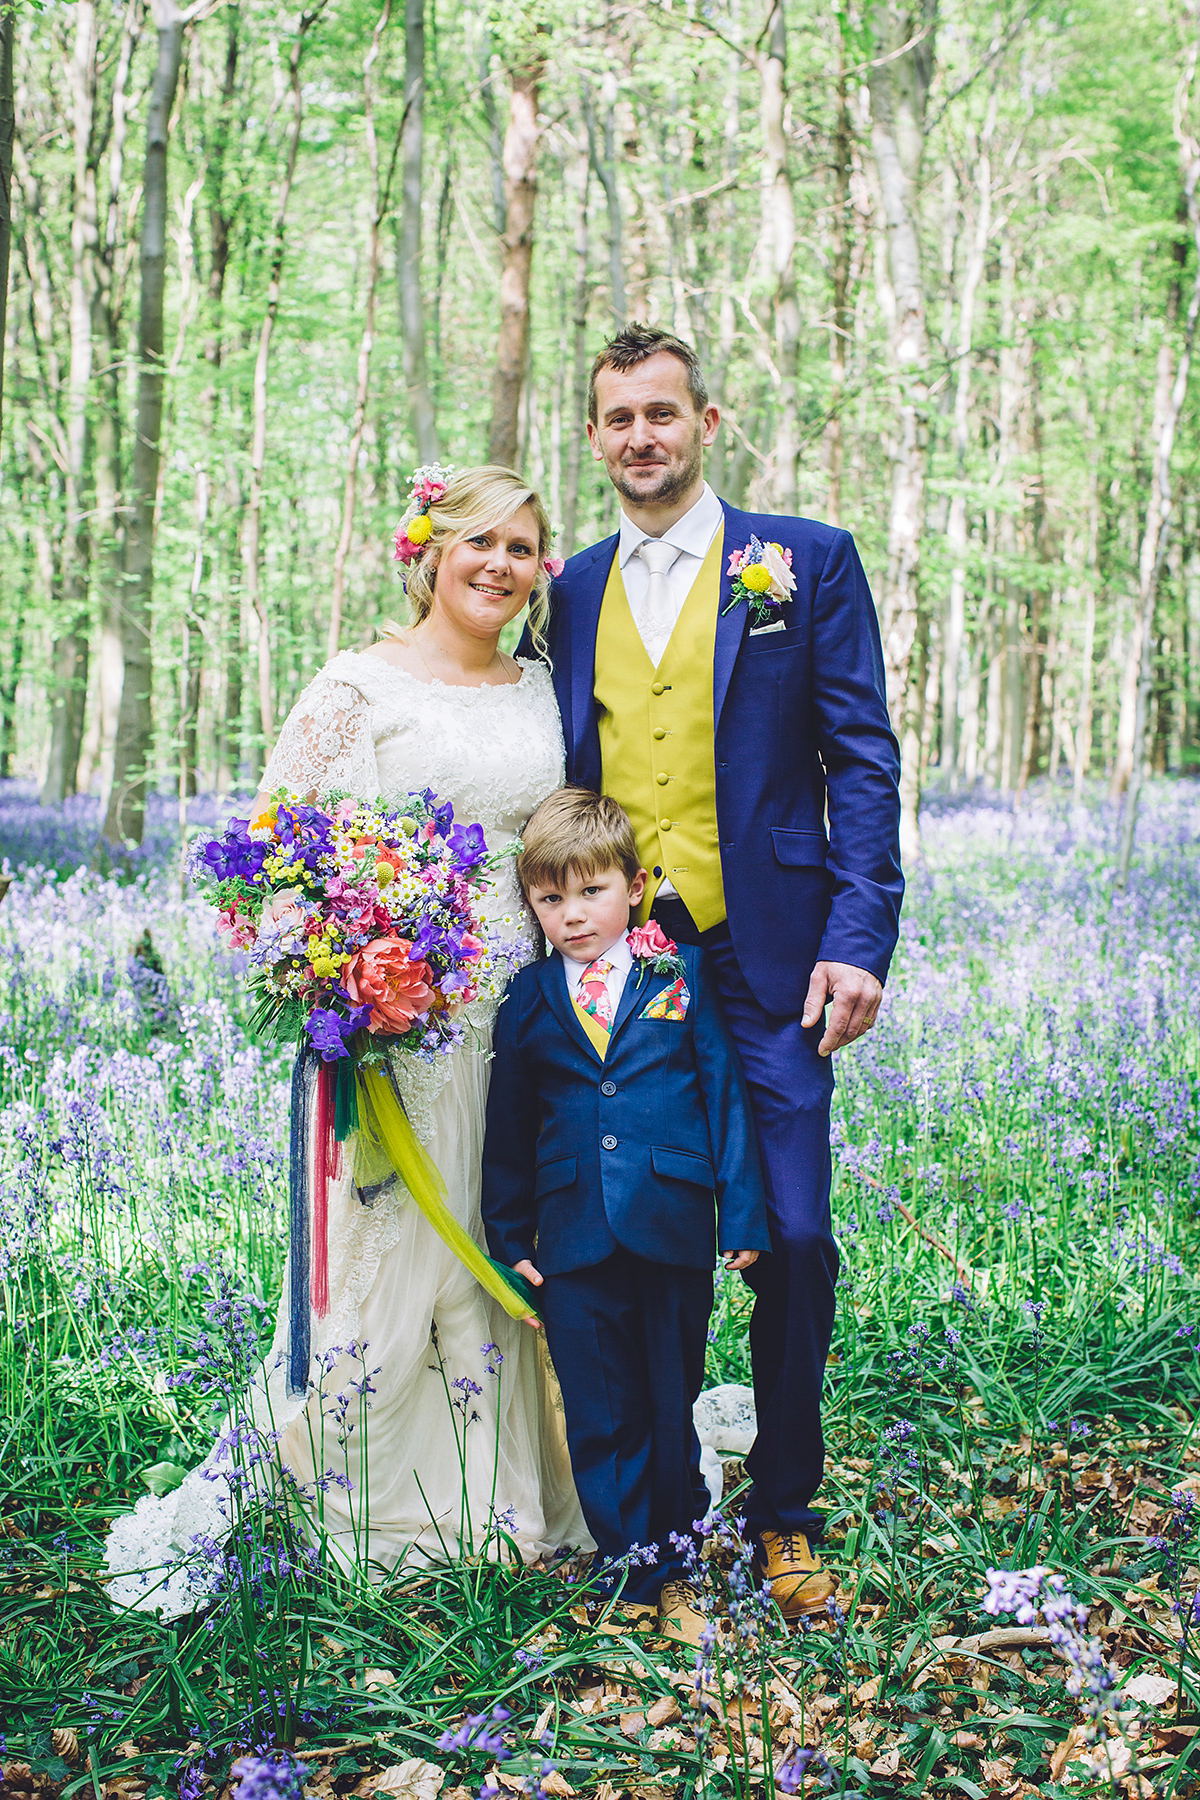 A Bridal Boutique Owners Colourful Woodland Wedding Amidst The